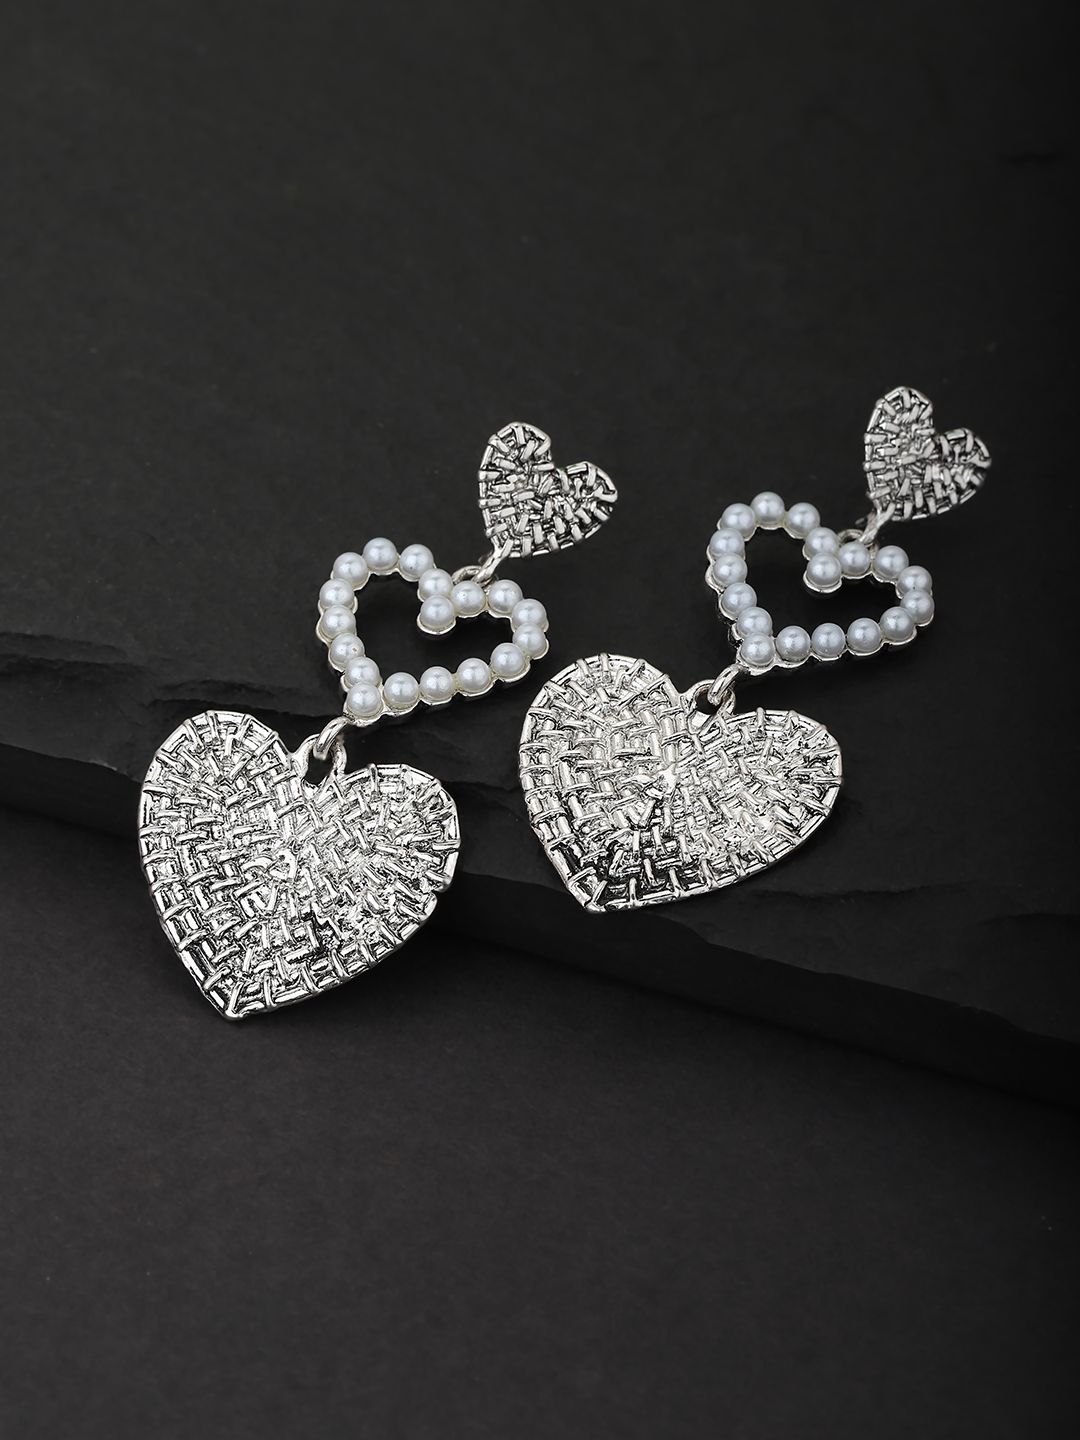 Carlton London Silver-Toned & Off White Rhodium-Plated Beaded Heart Shaped Drop Earrings Price in India